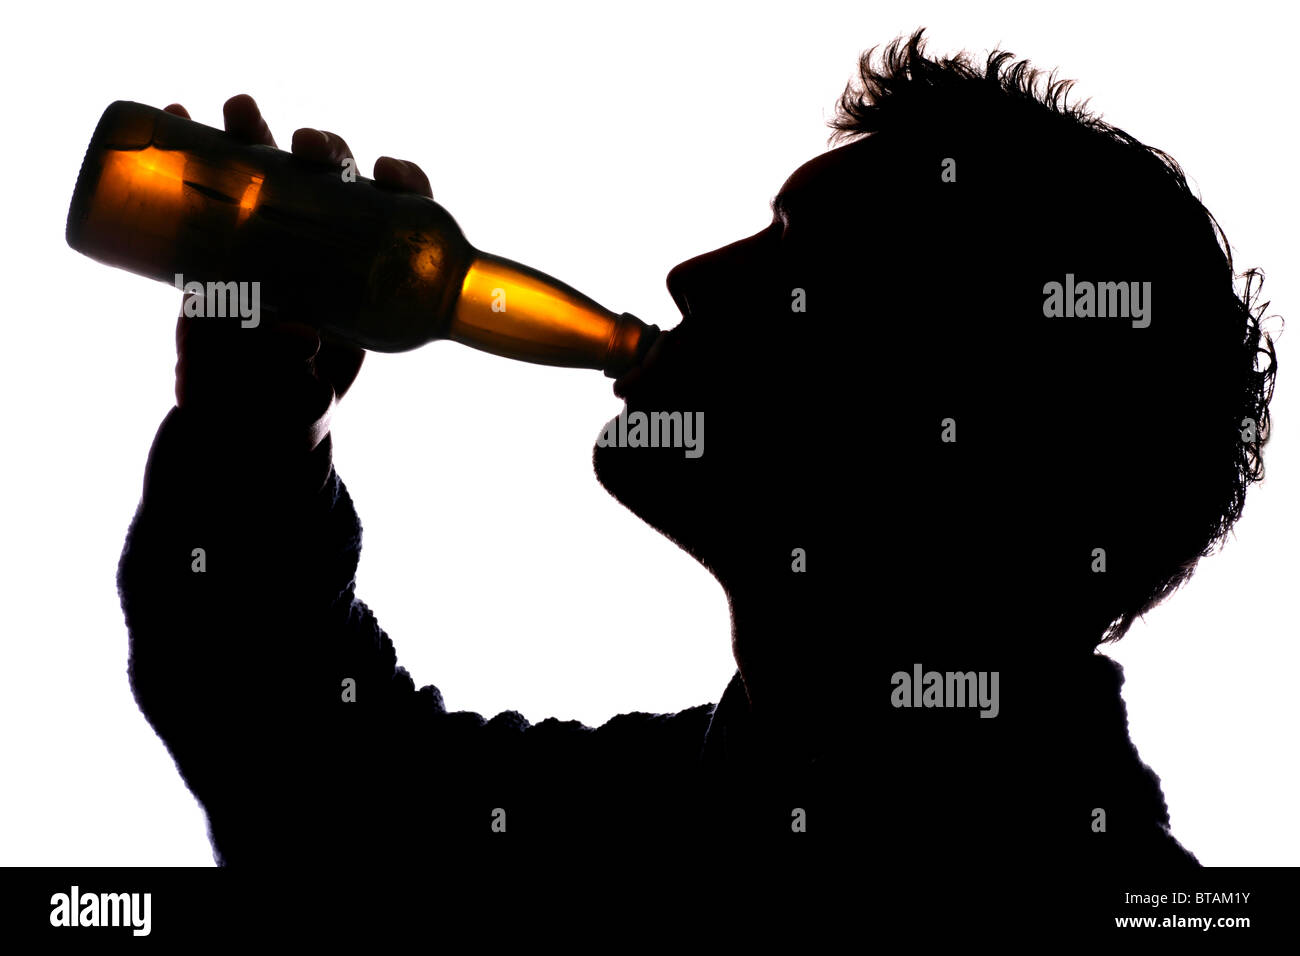 Man drinking bottle of cider silhouette Stock Photo